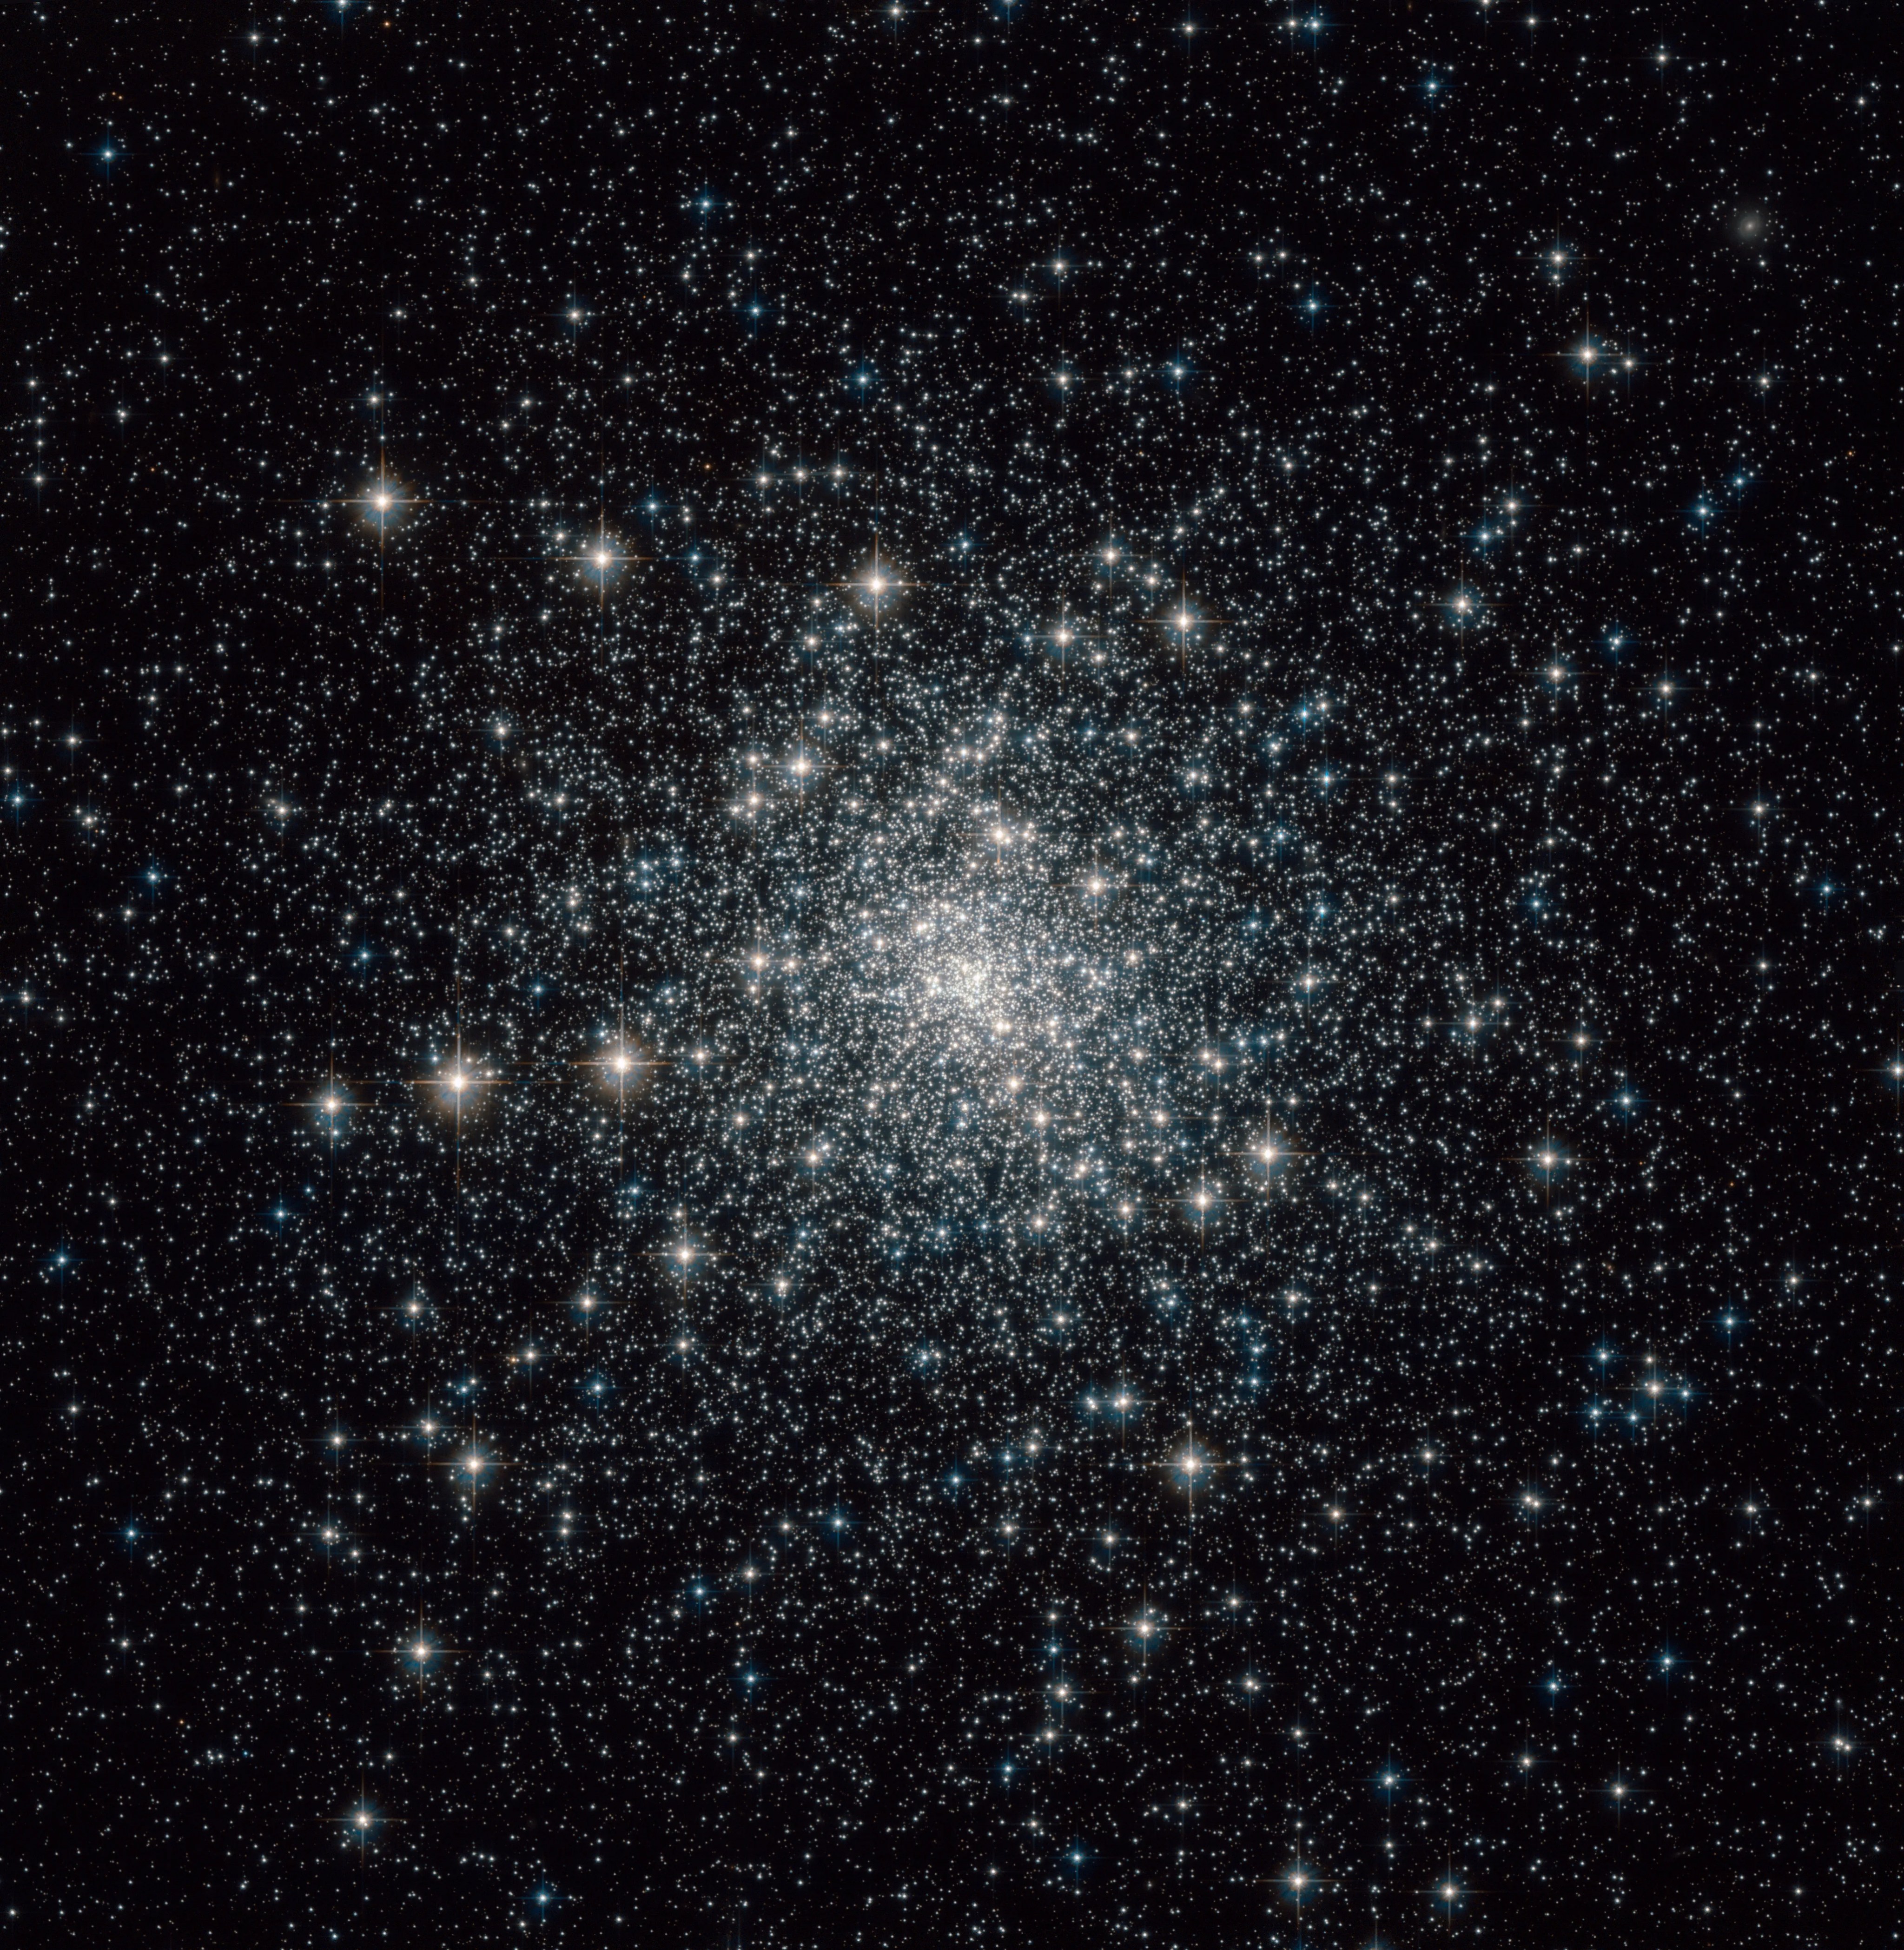 Thousands of mostly white and yellowish stars in a globular cluster.